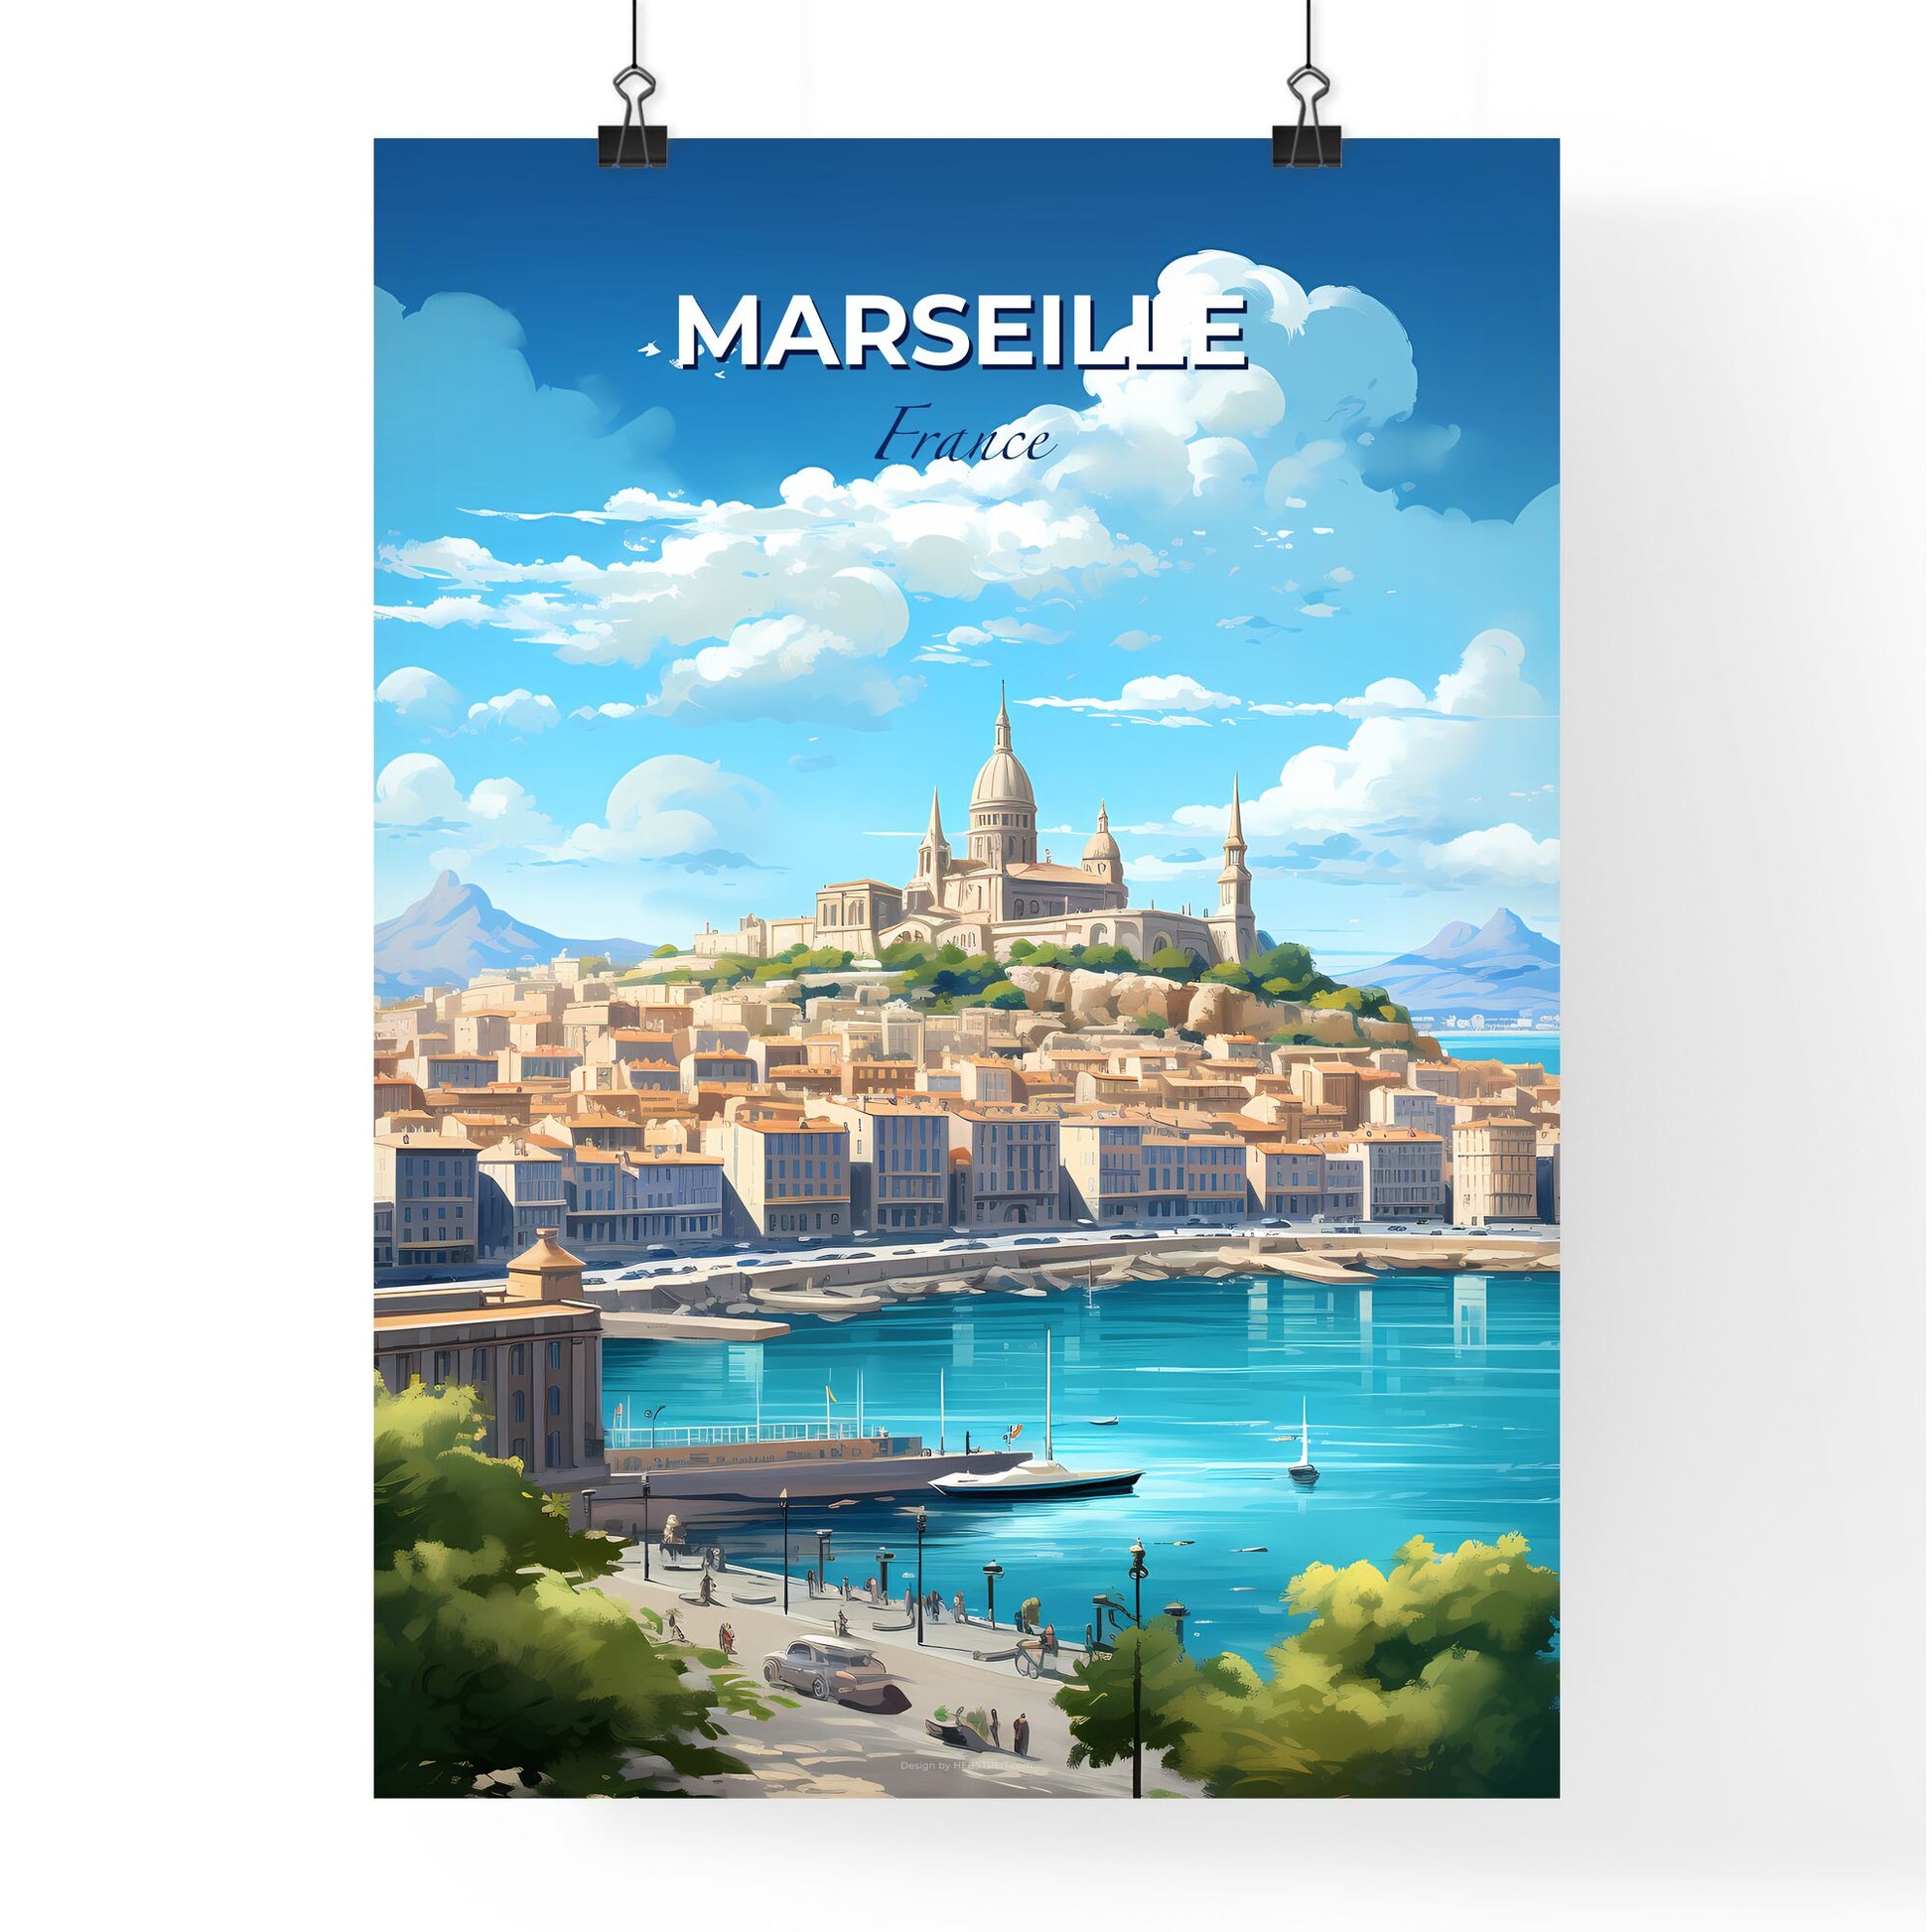 Marseille France Skyline - A City With A Castle On A Hill And A Body Of Water - Customizable Travel Gift Default Title